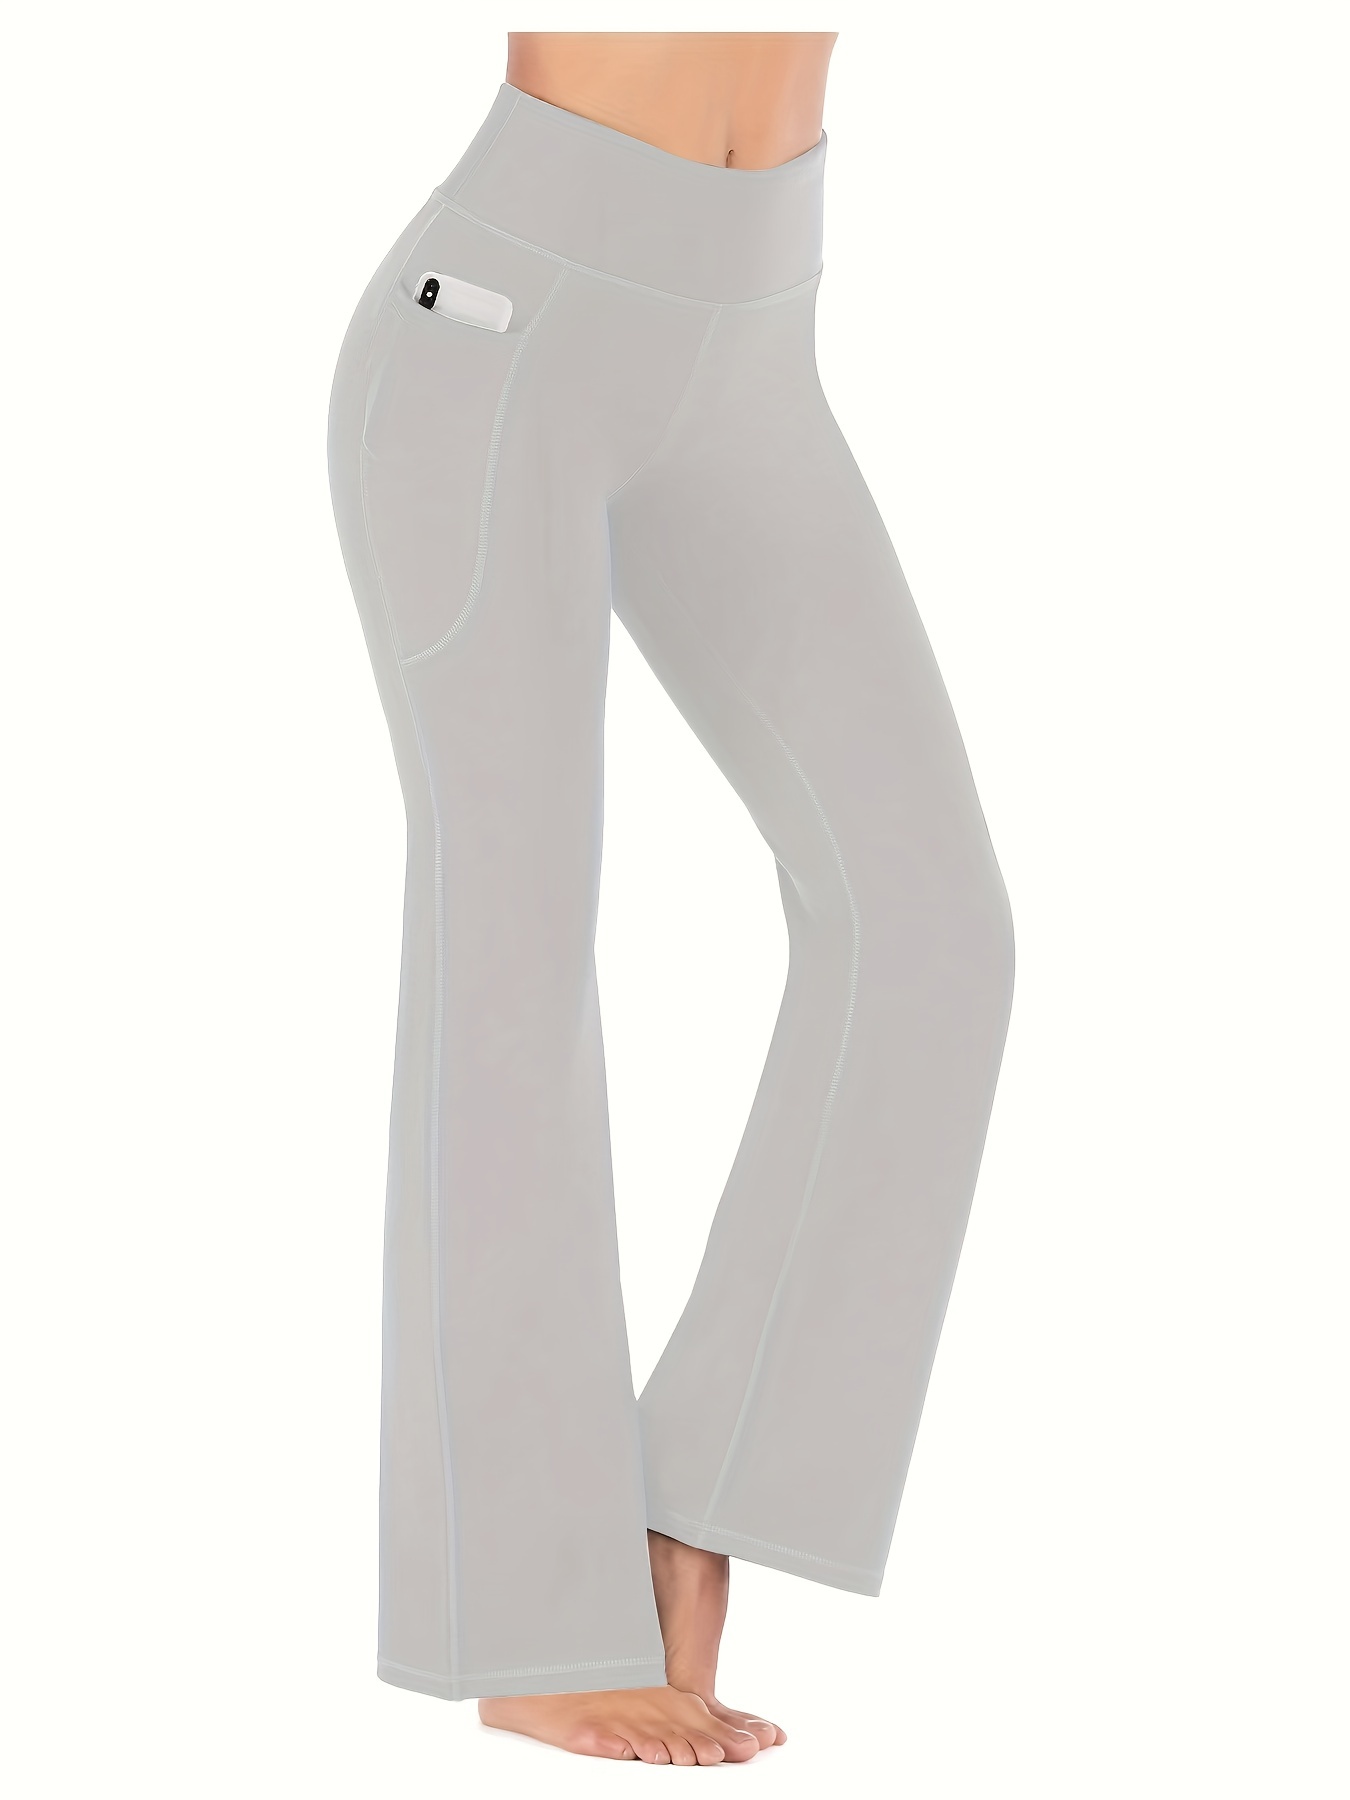 Flare Yoga Pants With Pockets Petite USA Stores